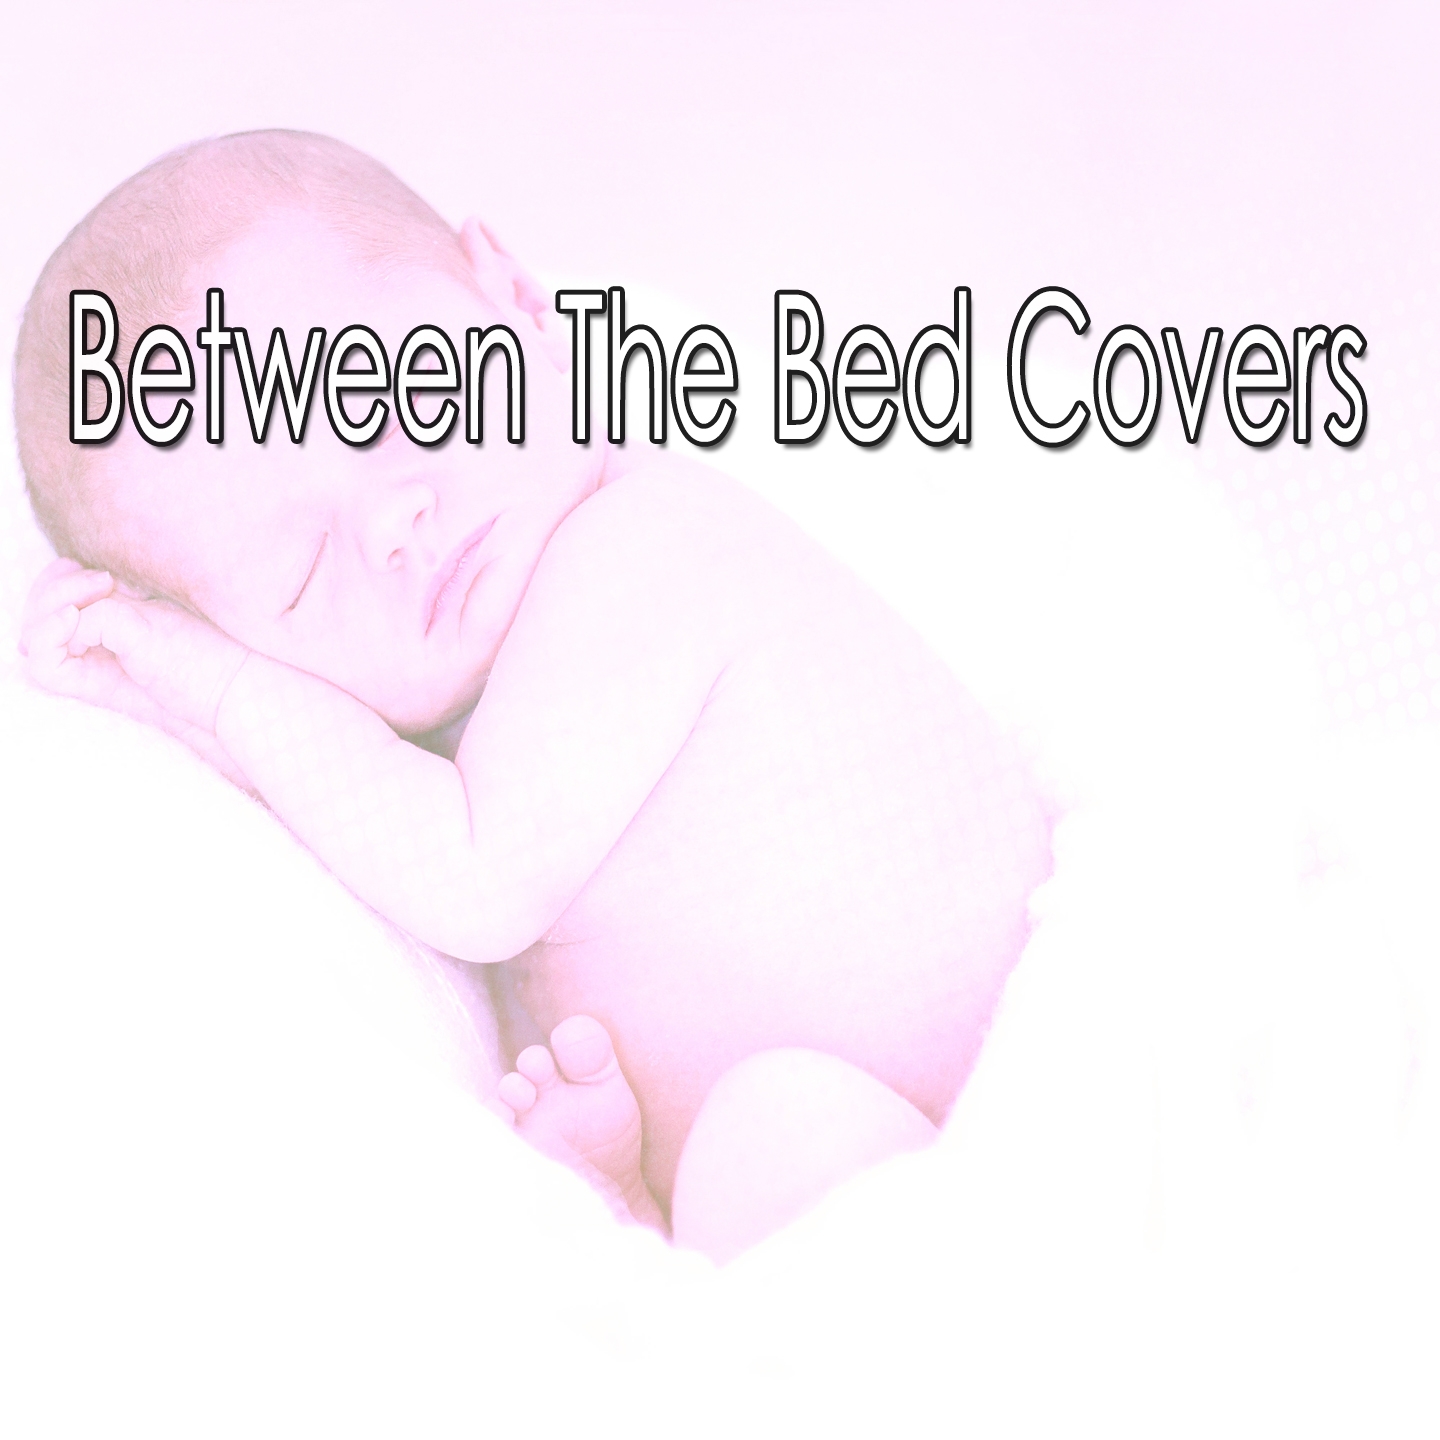 Between The Bed Covers